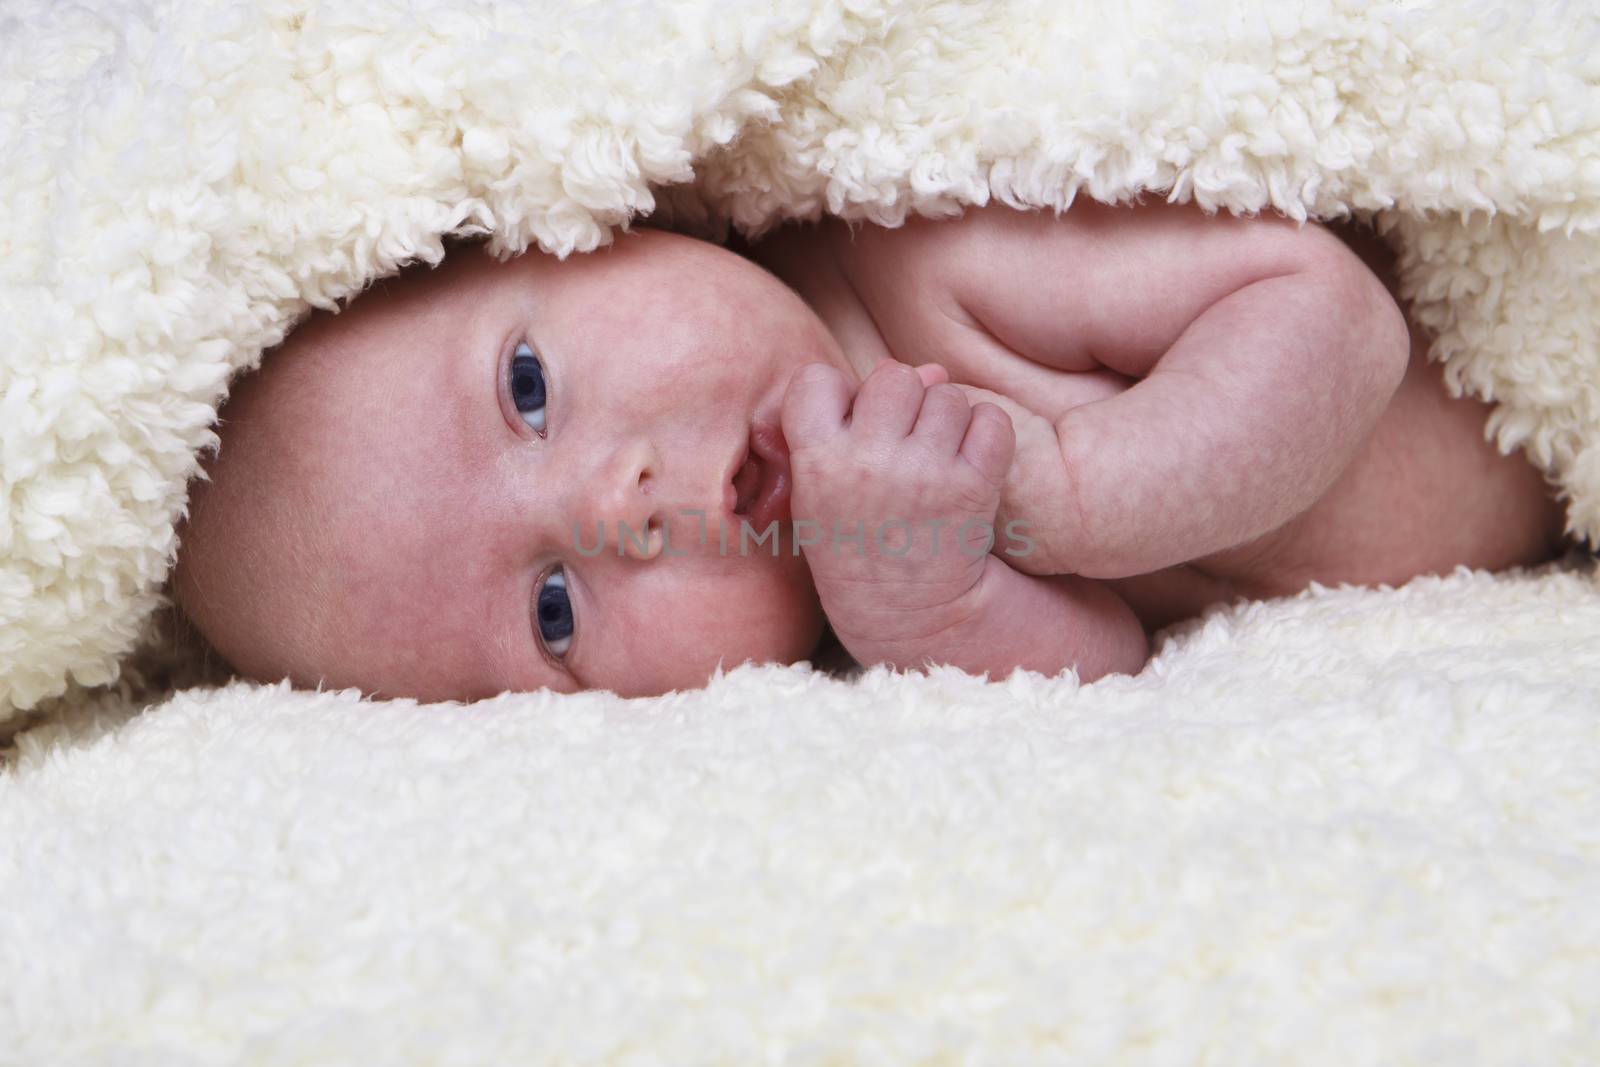 newborn baby lying in bed  on a soft blanket with eyes wide open